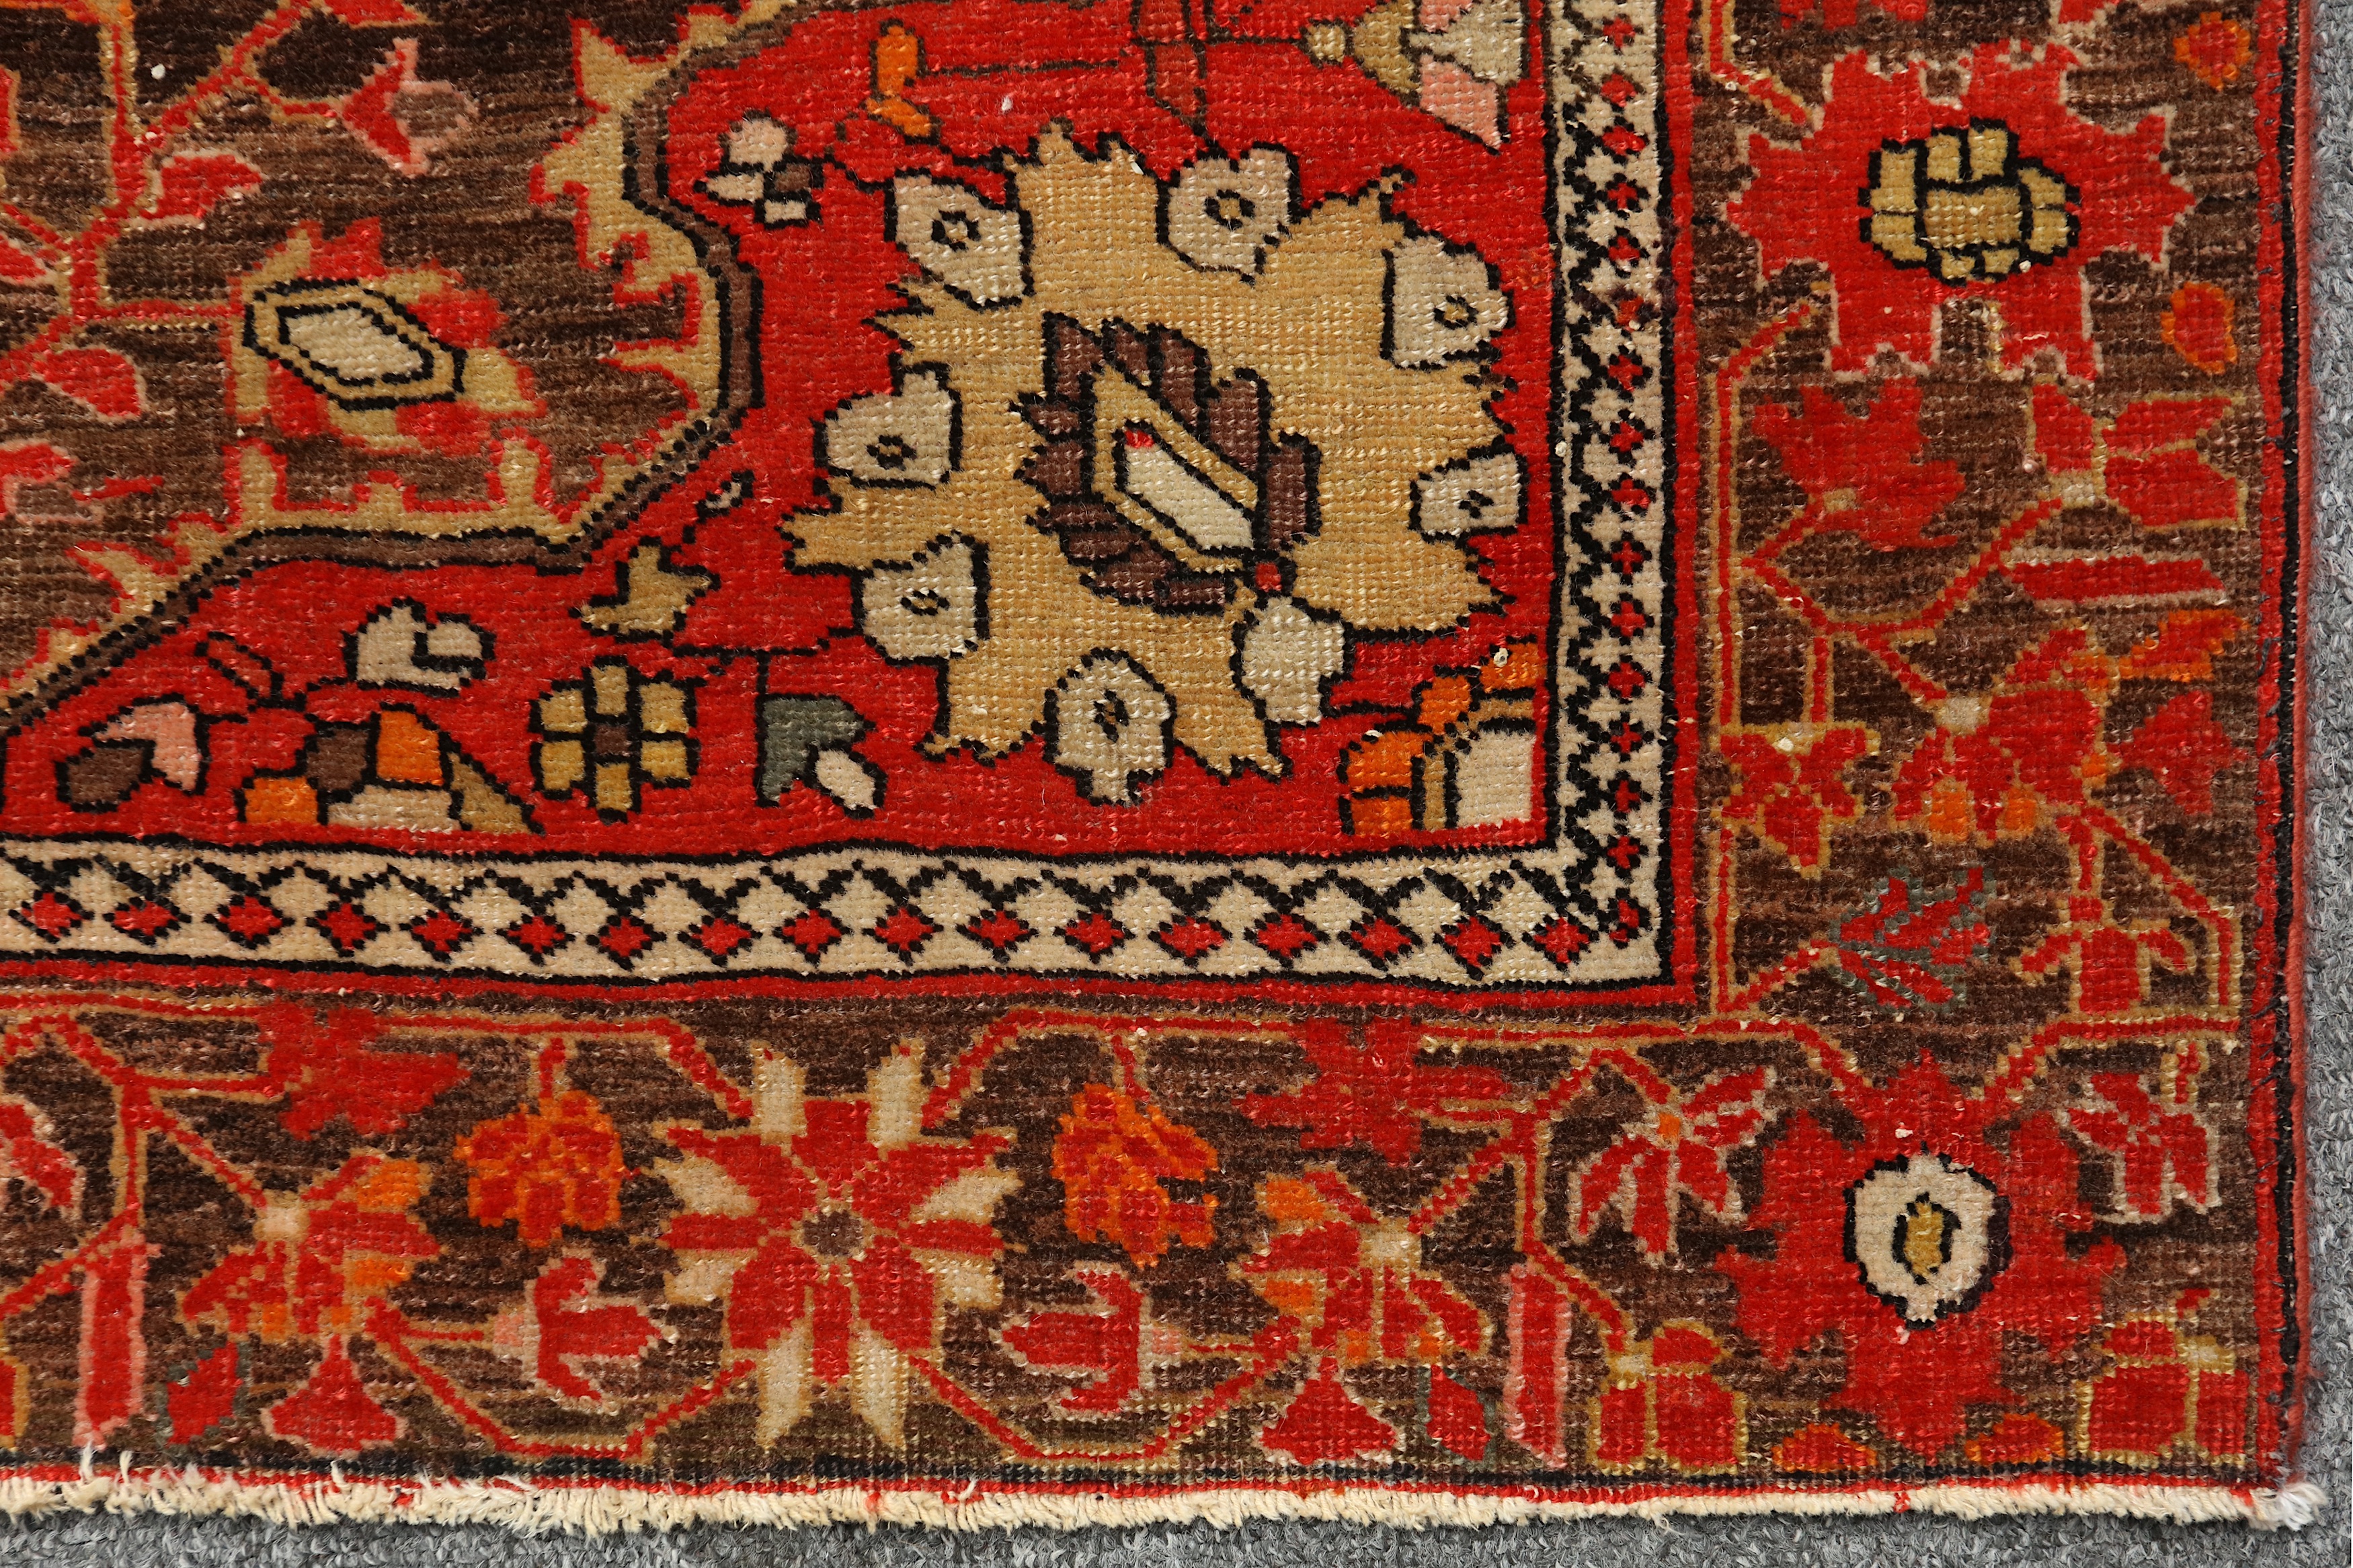 A FINE SAROUK-FERAGHAN RUG, WEST PERSIA - Image 6 of 7